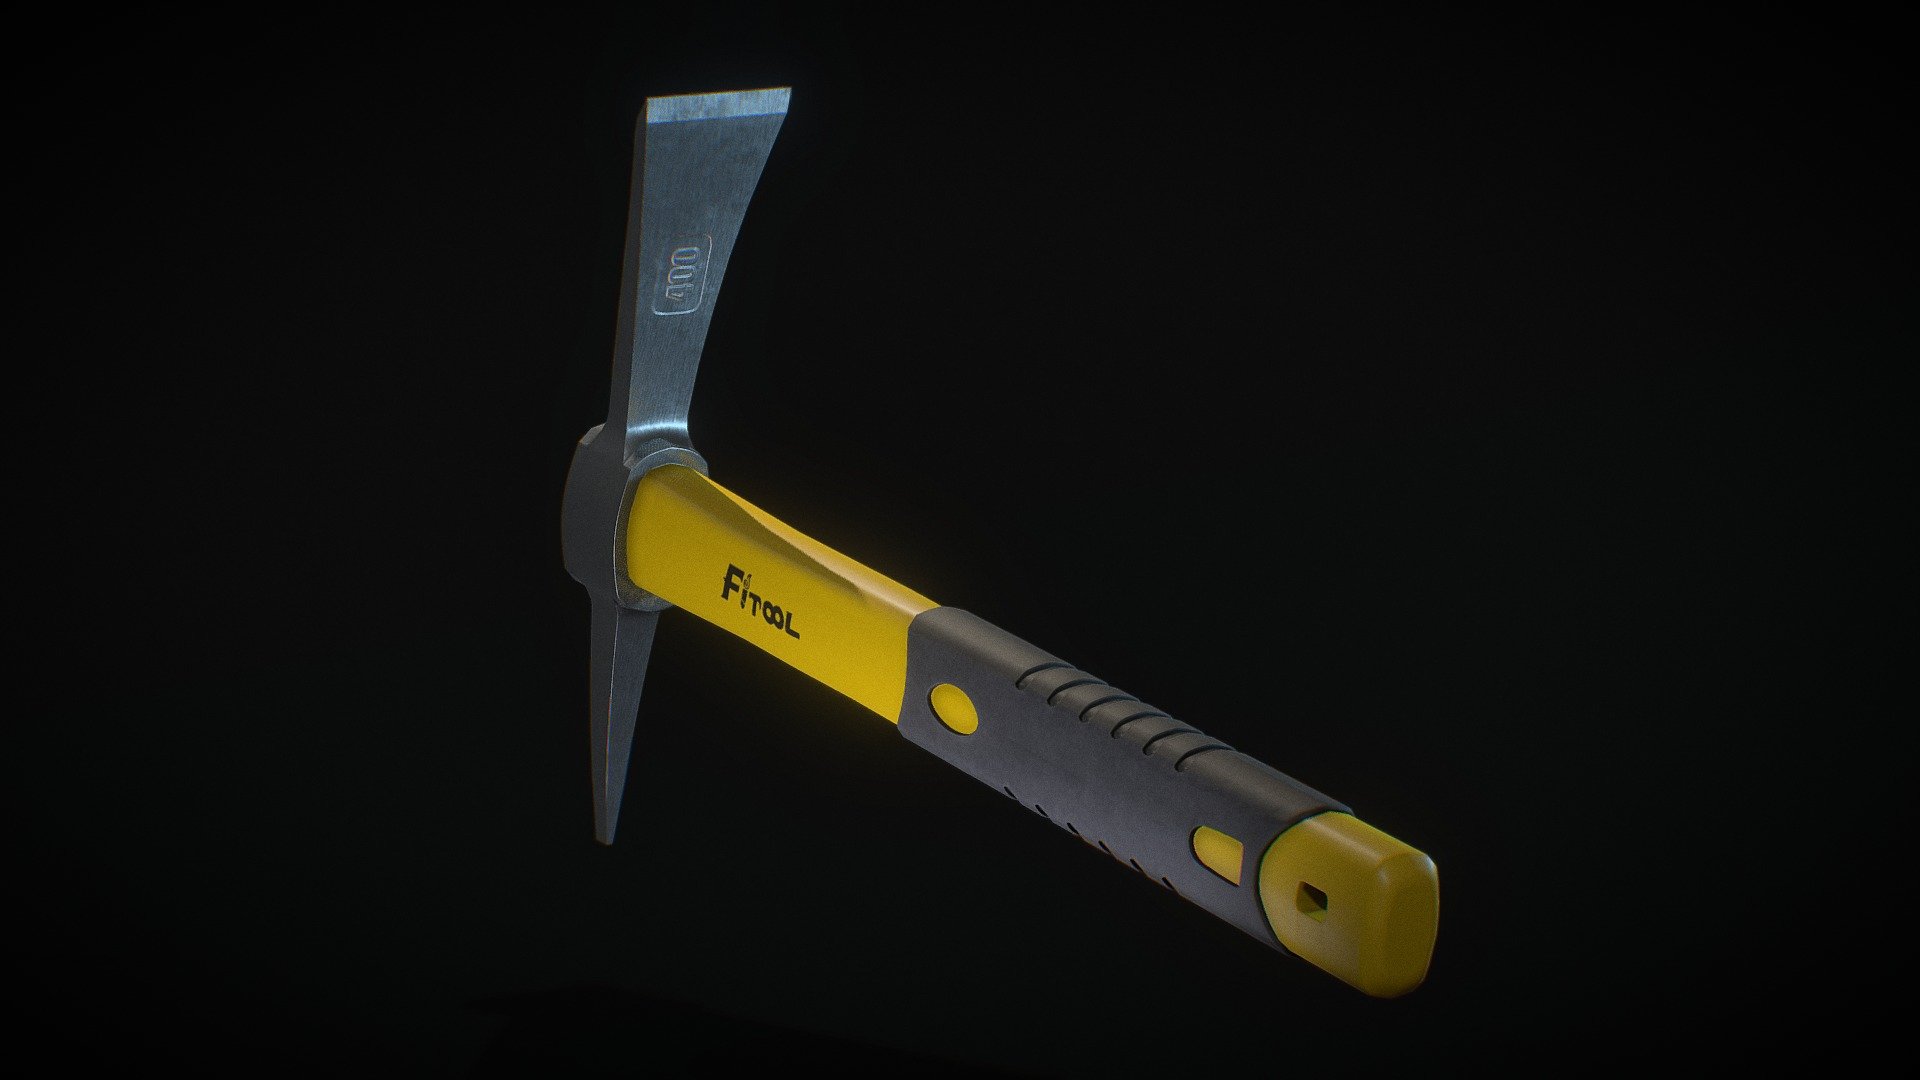 Firool gardening pickAxe brushed 3d model ready for VirtualReality(VR),Augmented Reality(AR),games and other render engines.This lowpoly 3d model is baked with 4k resolution textures.The PBR_Maps includes- albedo,roughness,metallic and normal 3d model